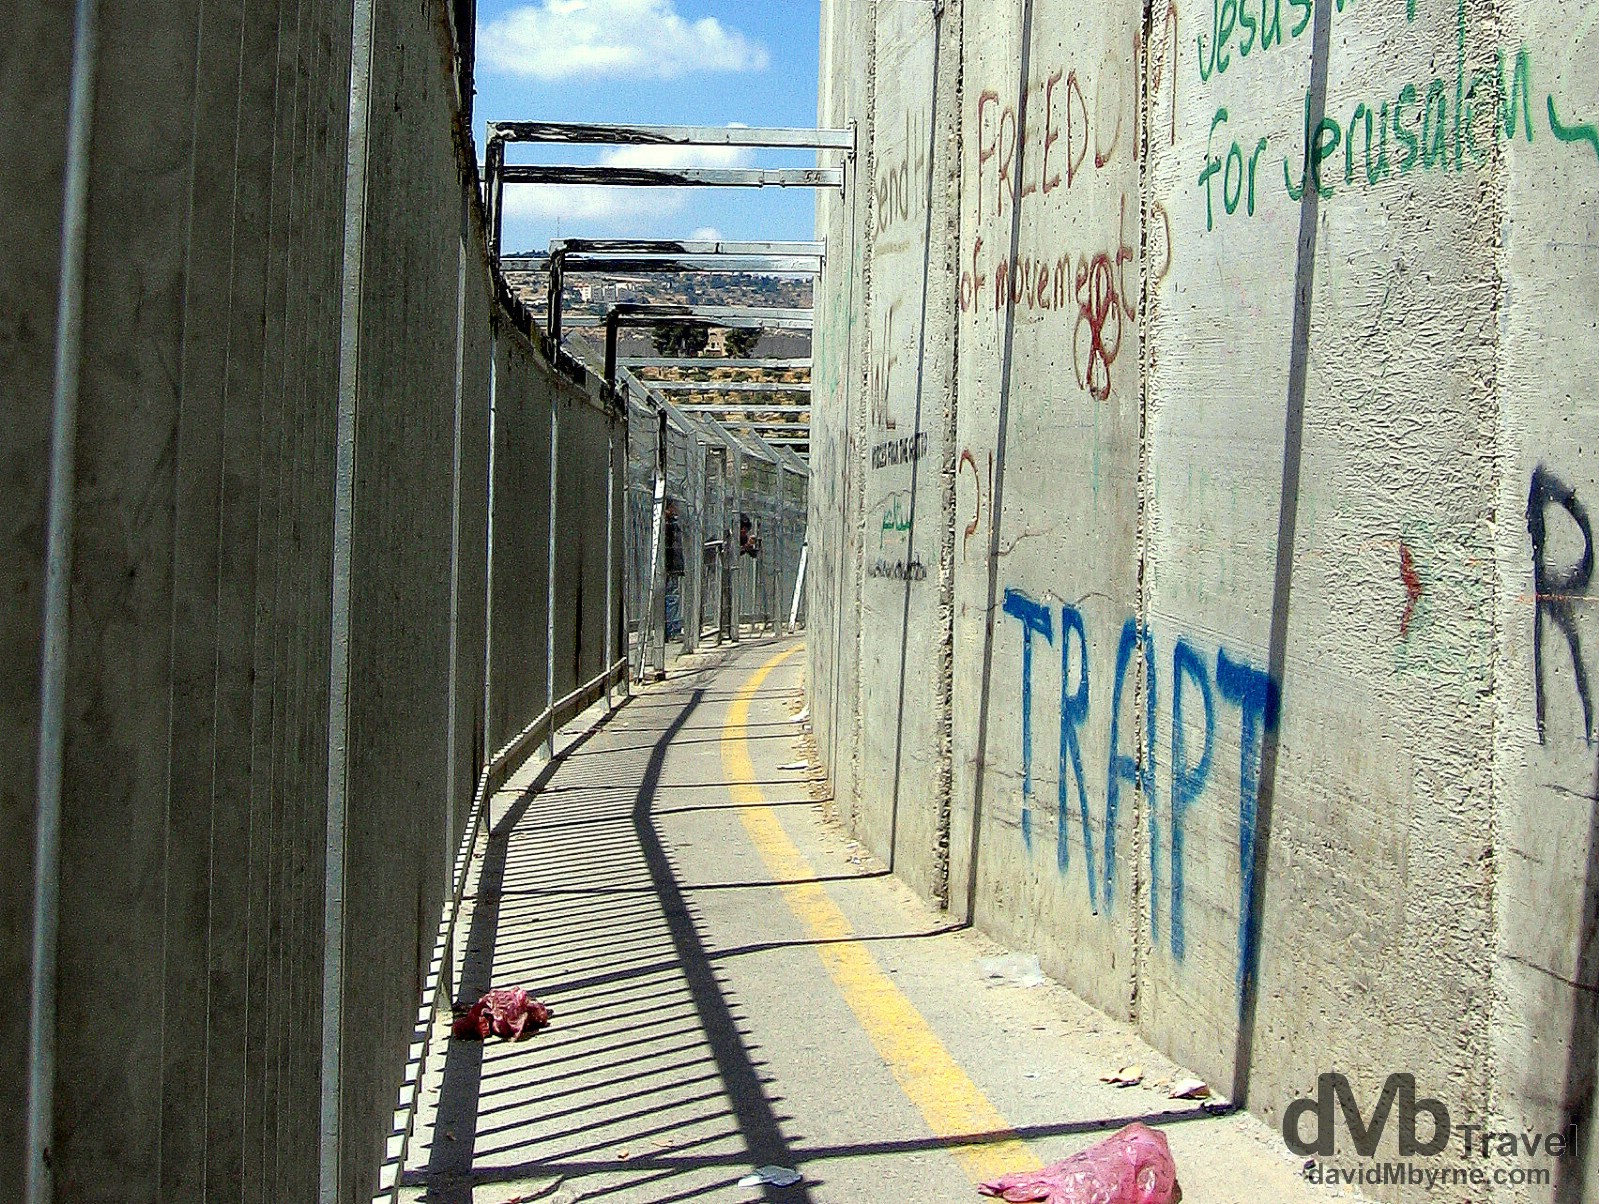 A section of the heavily guarded wall separating the Palestinian West Back from Israel. May 2, 2008. 